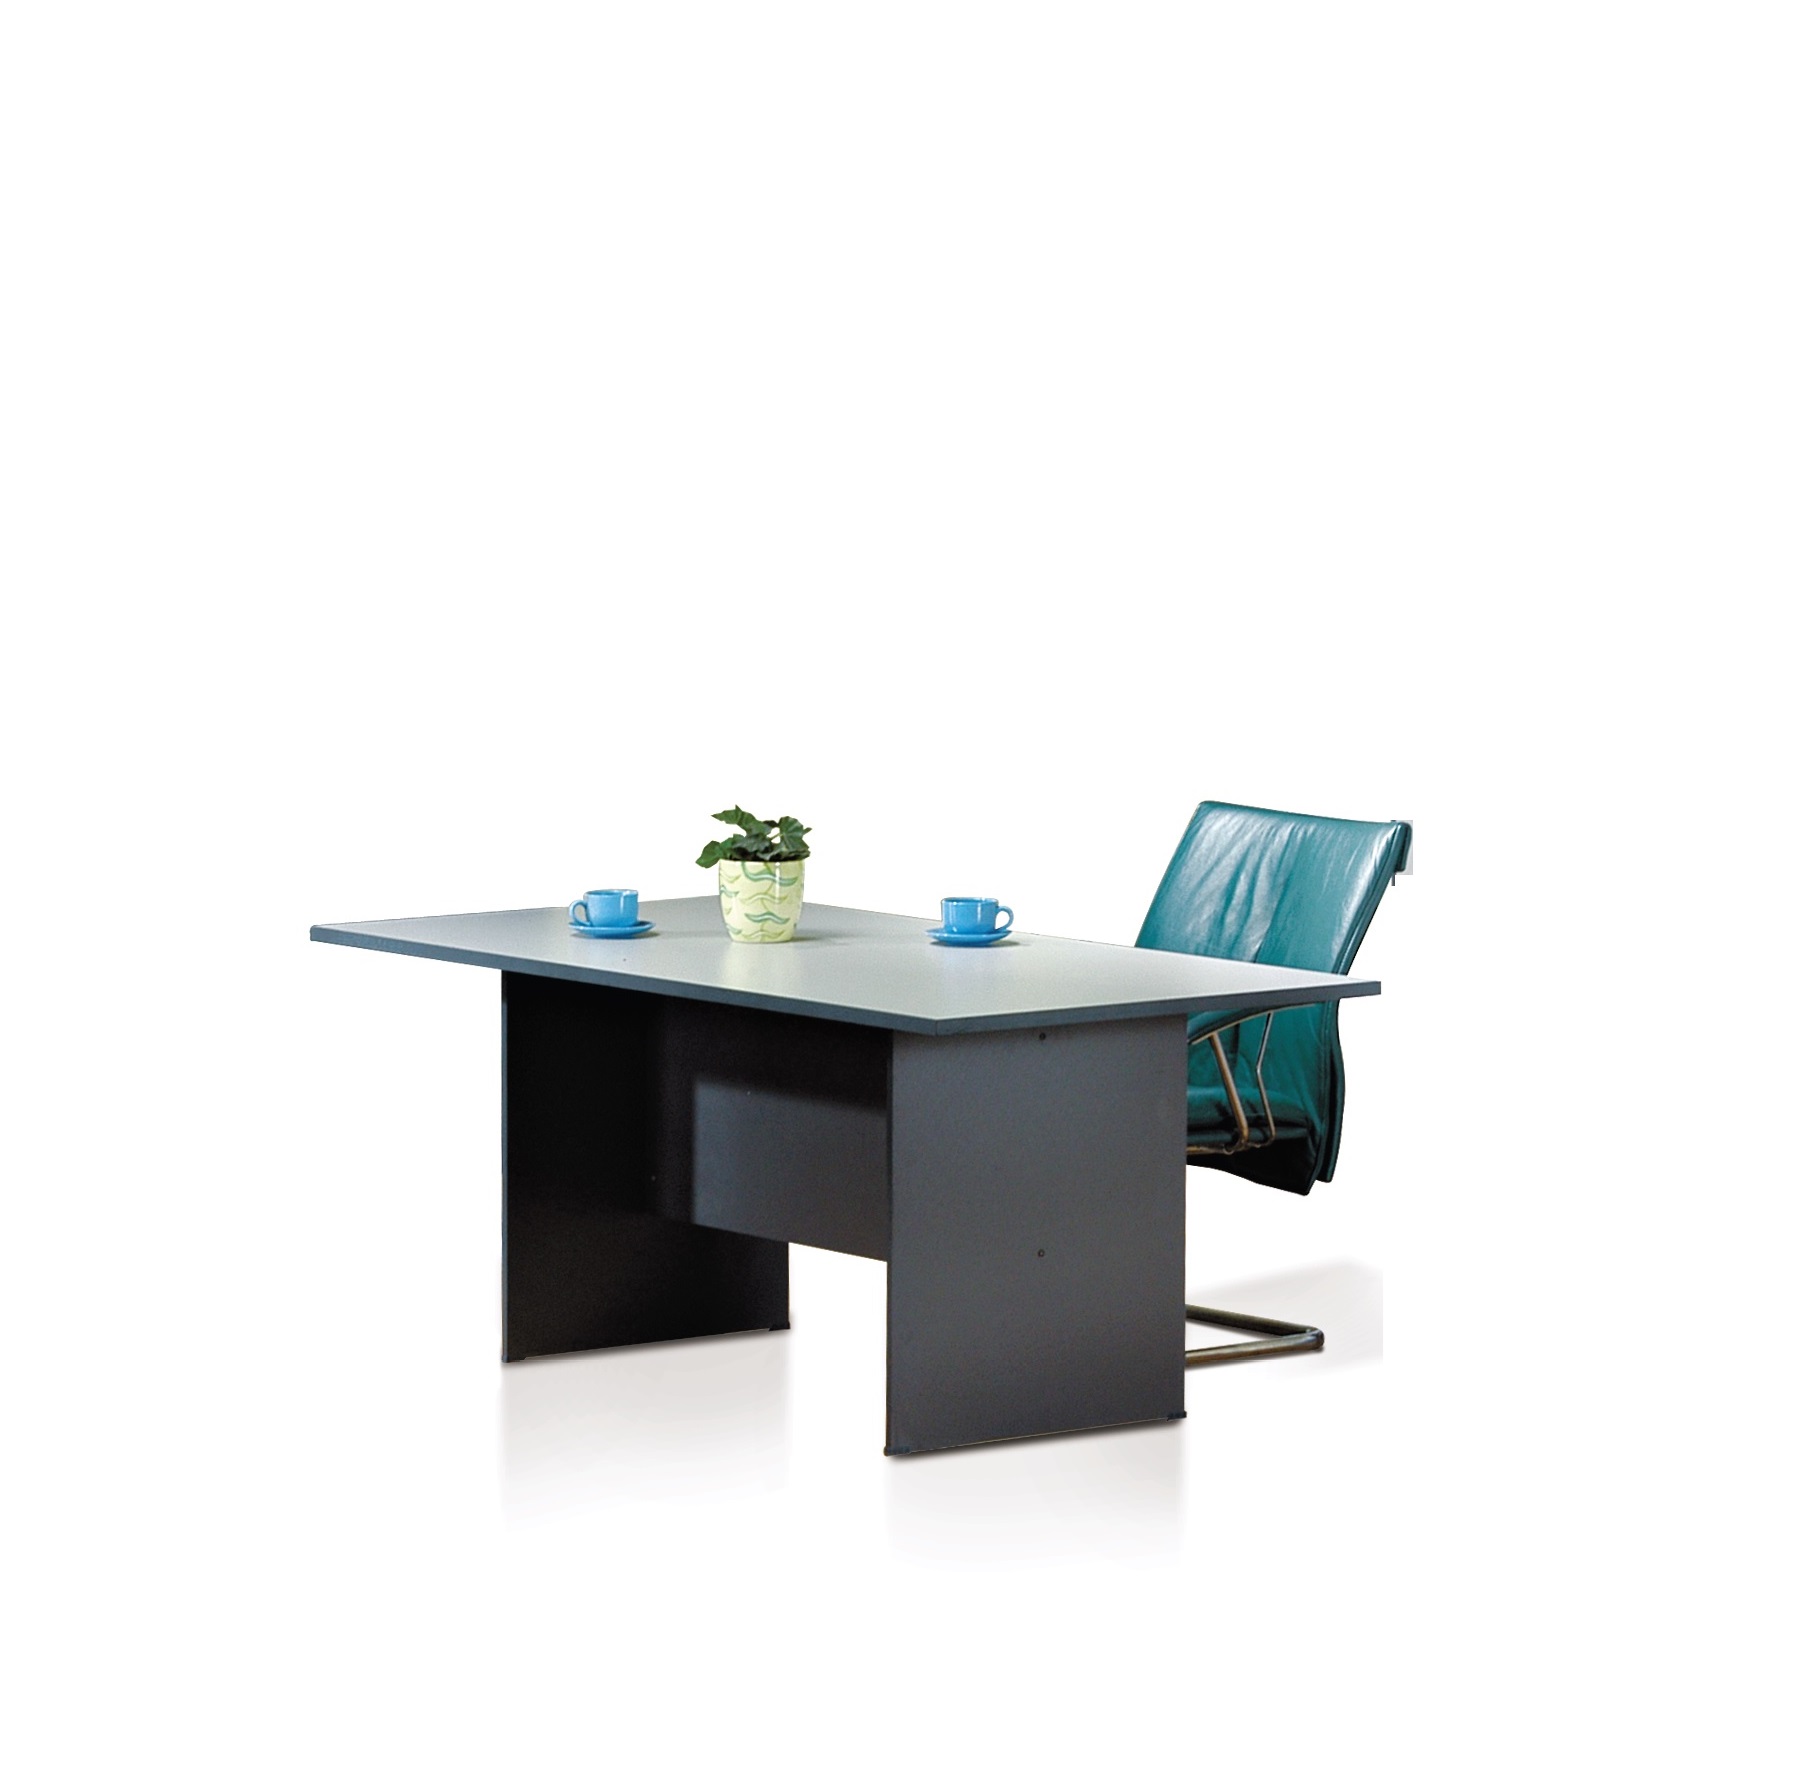 EX-Series Conference Table